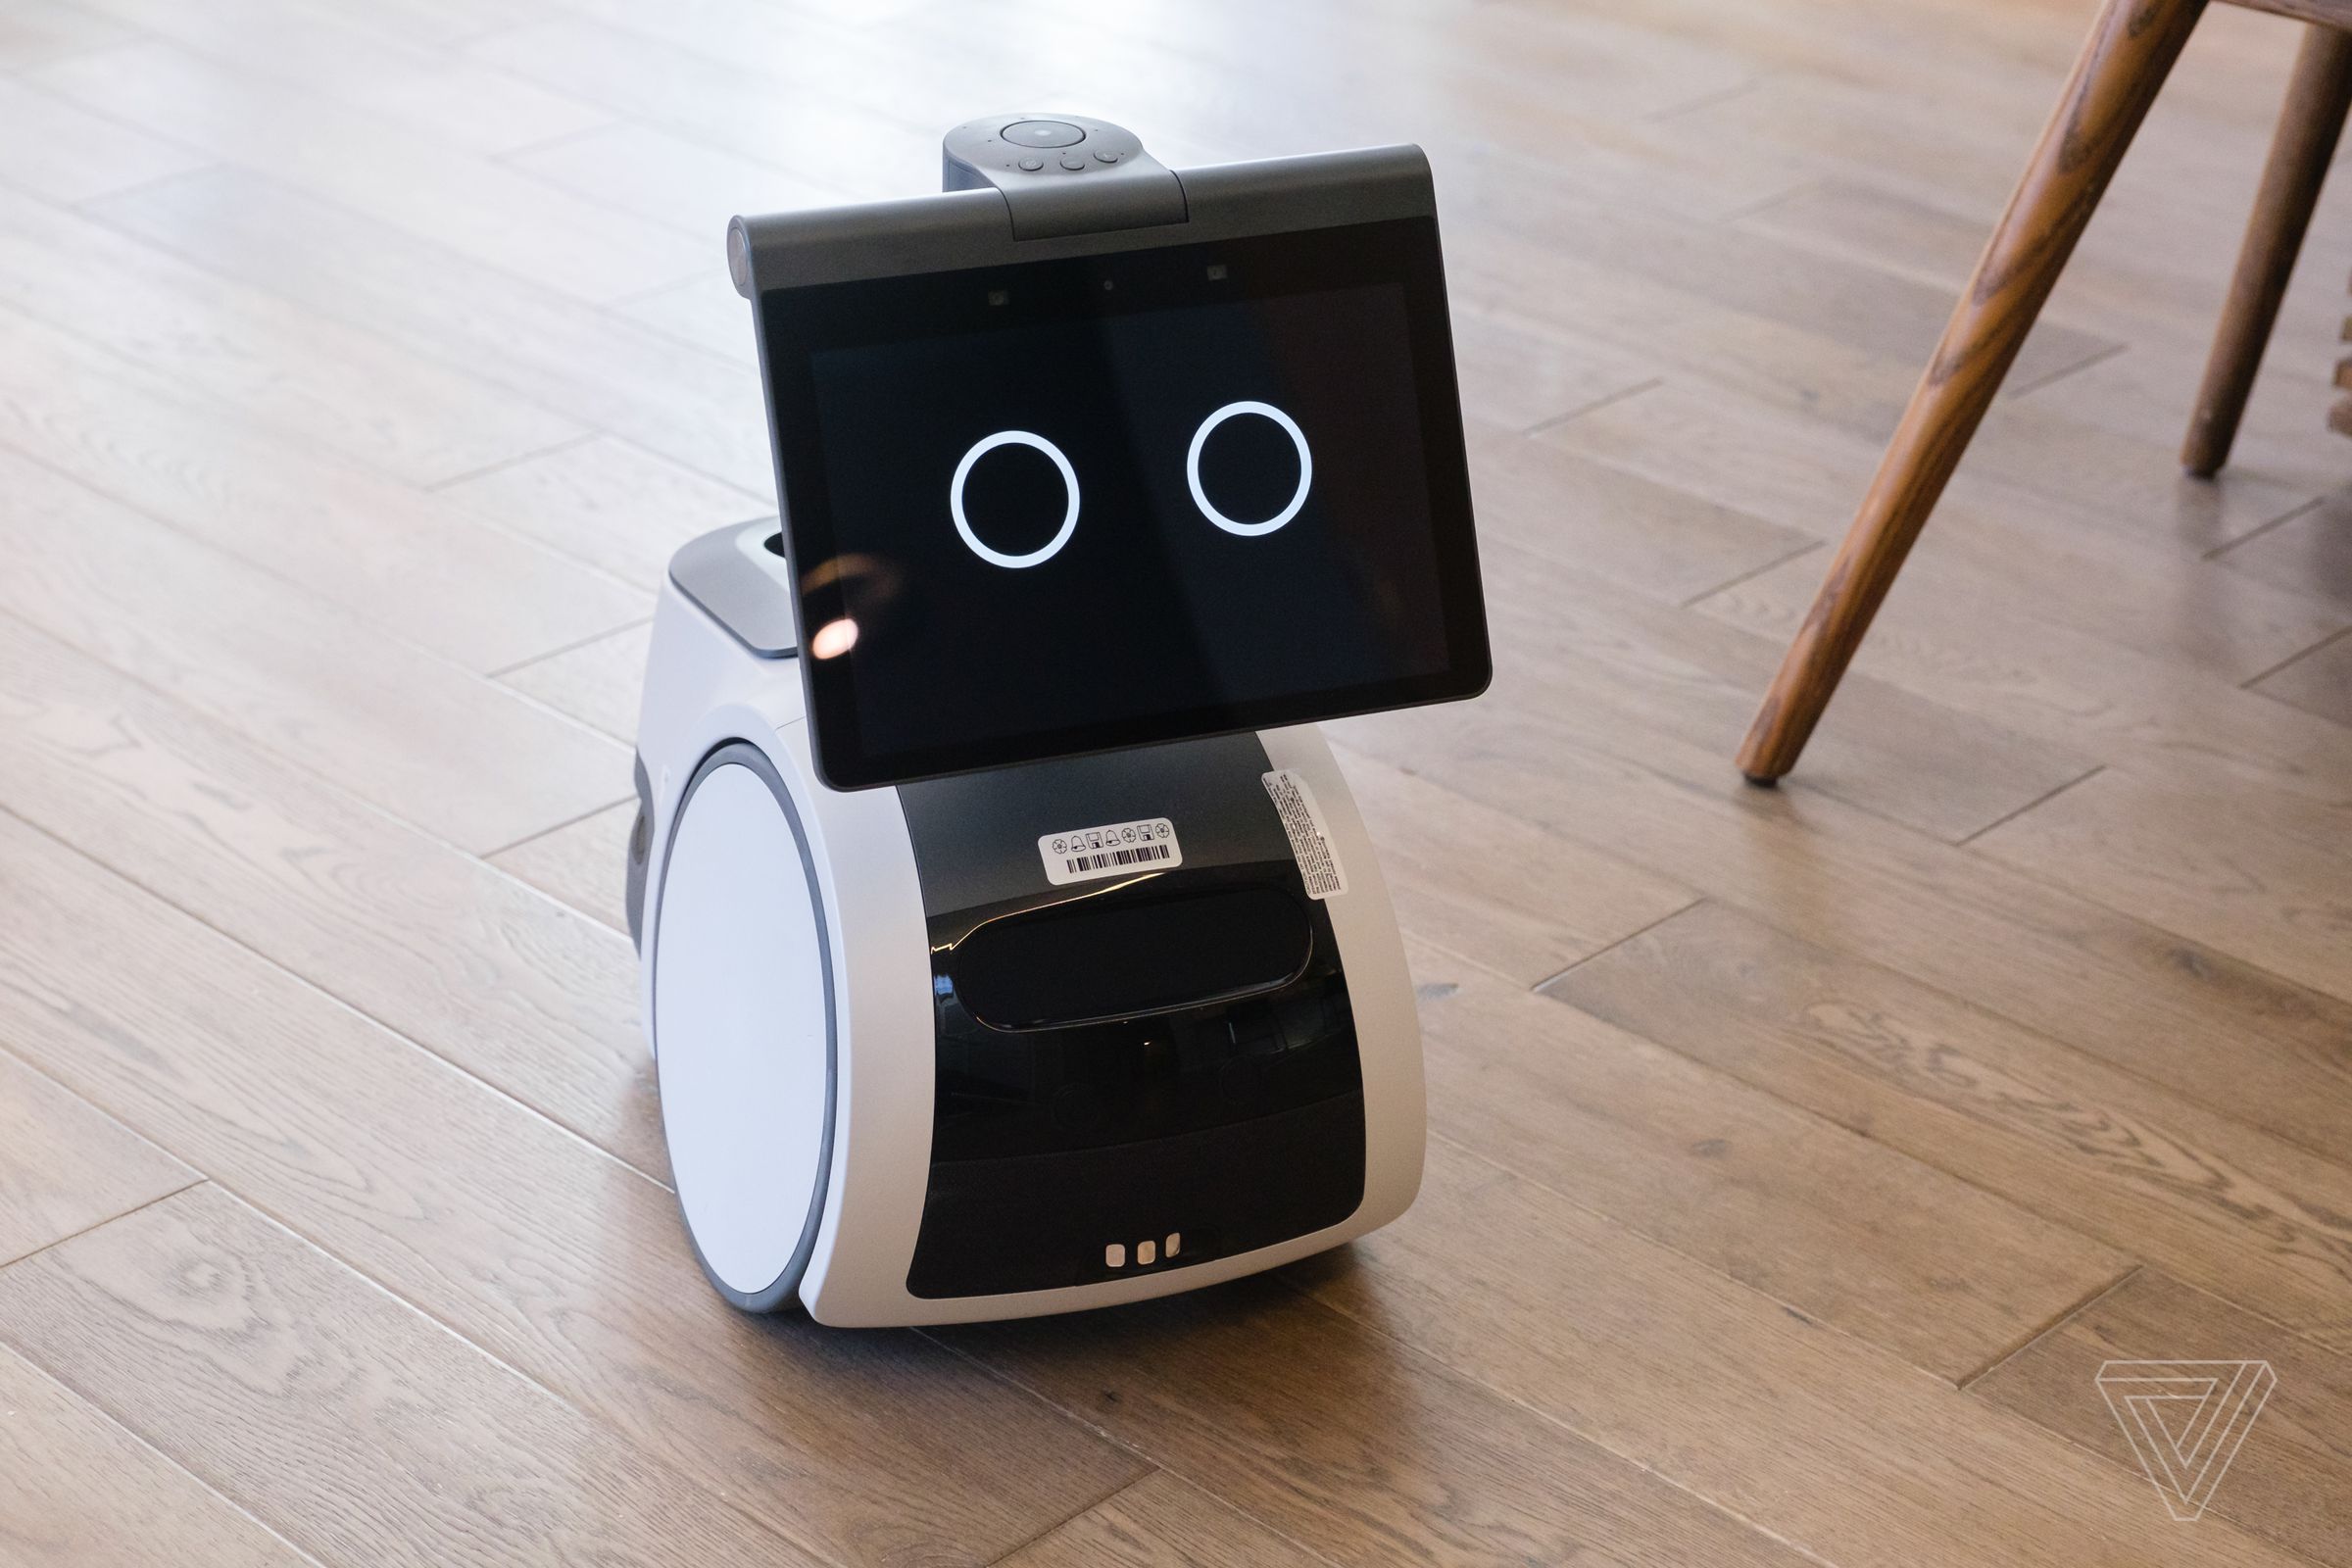 Amazon’s new home robot Astro has been spotted in the wild.